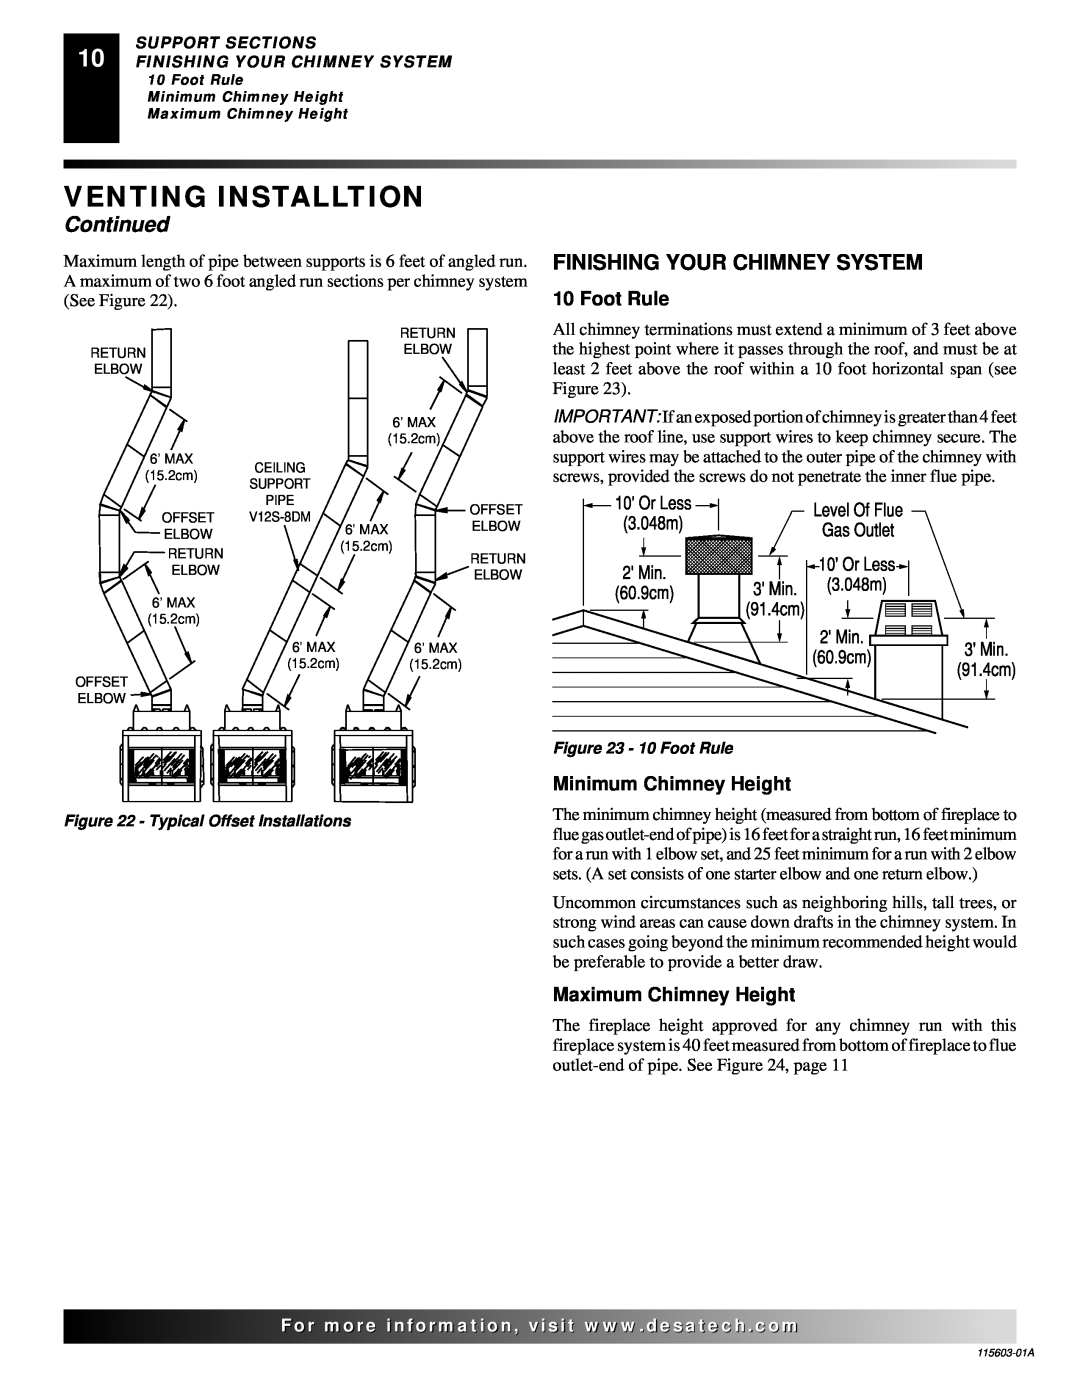 Desa (V)3612ST Venting Installtion, Continued, Finishing Your Chimney System, Foot Rule, Minimum Chimney Height 